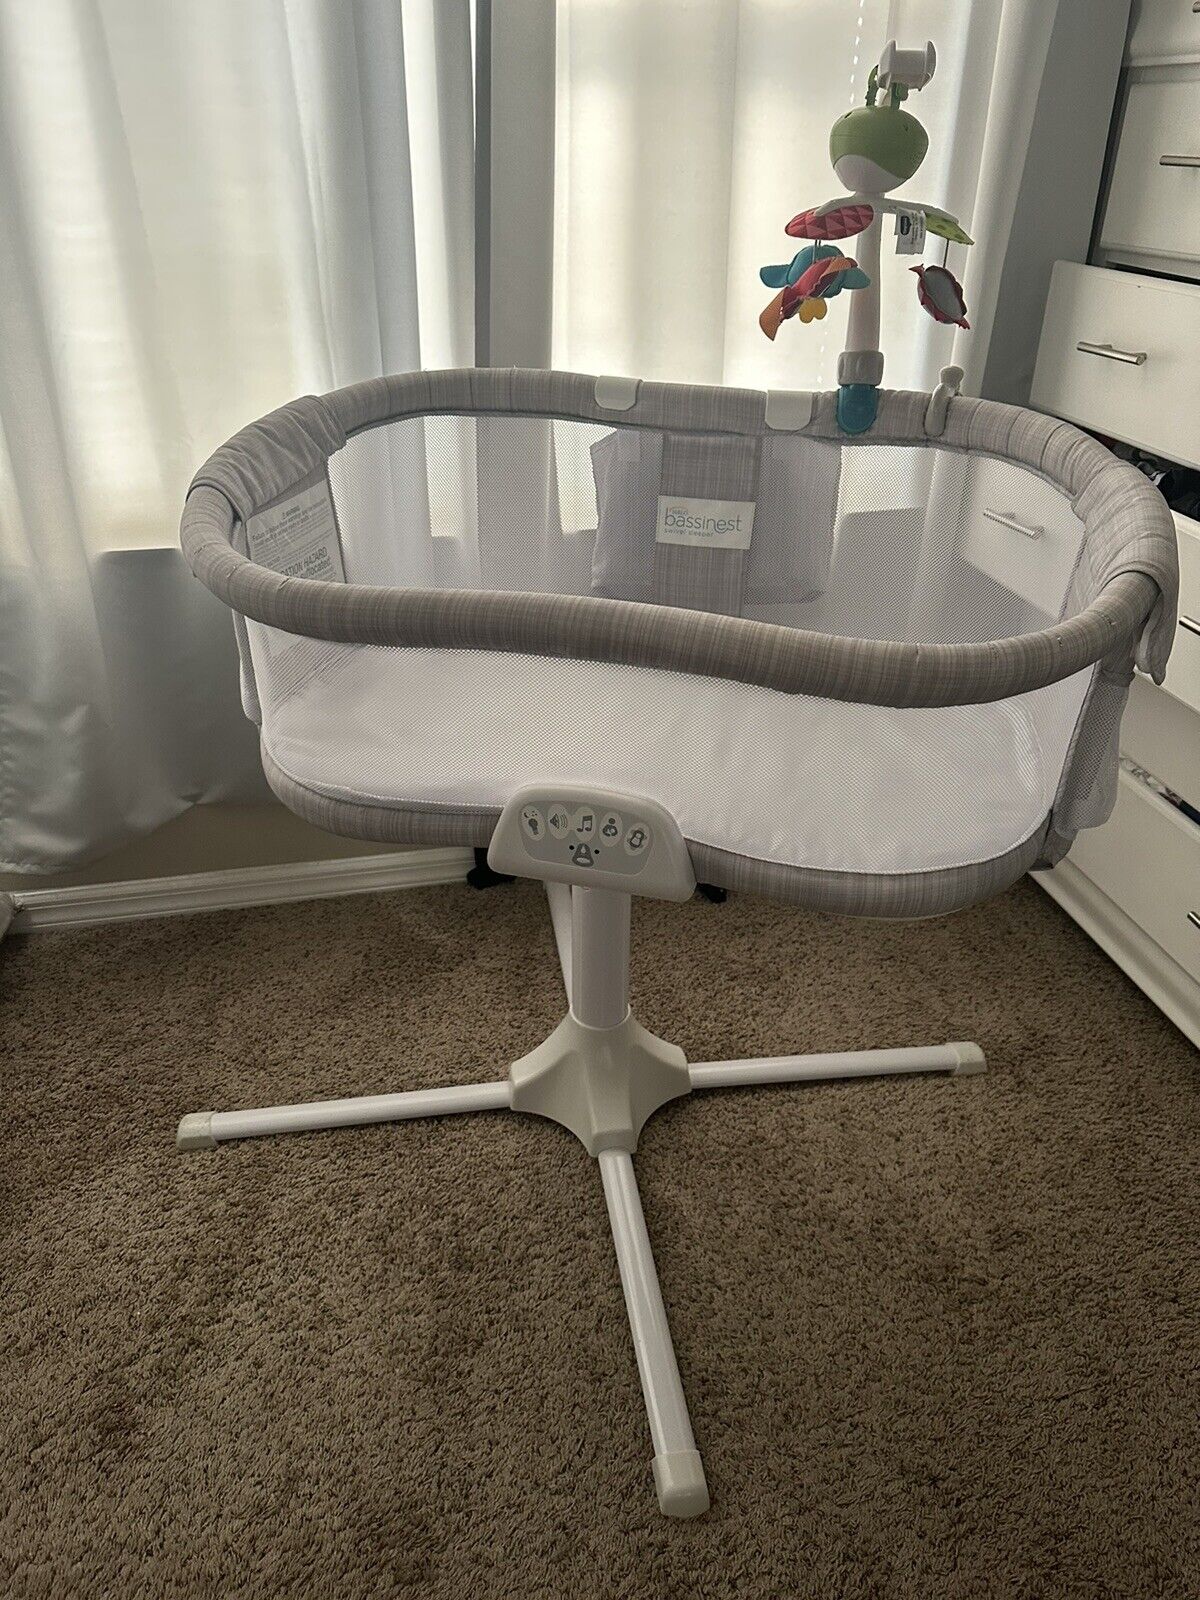 Sleeping Soundly: The Halo Bassinet Swivel Sleeper Review